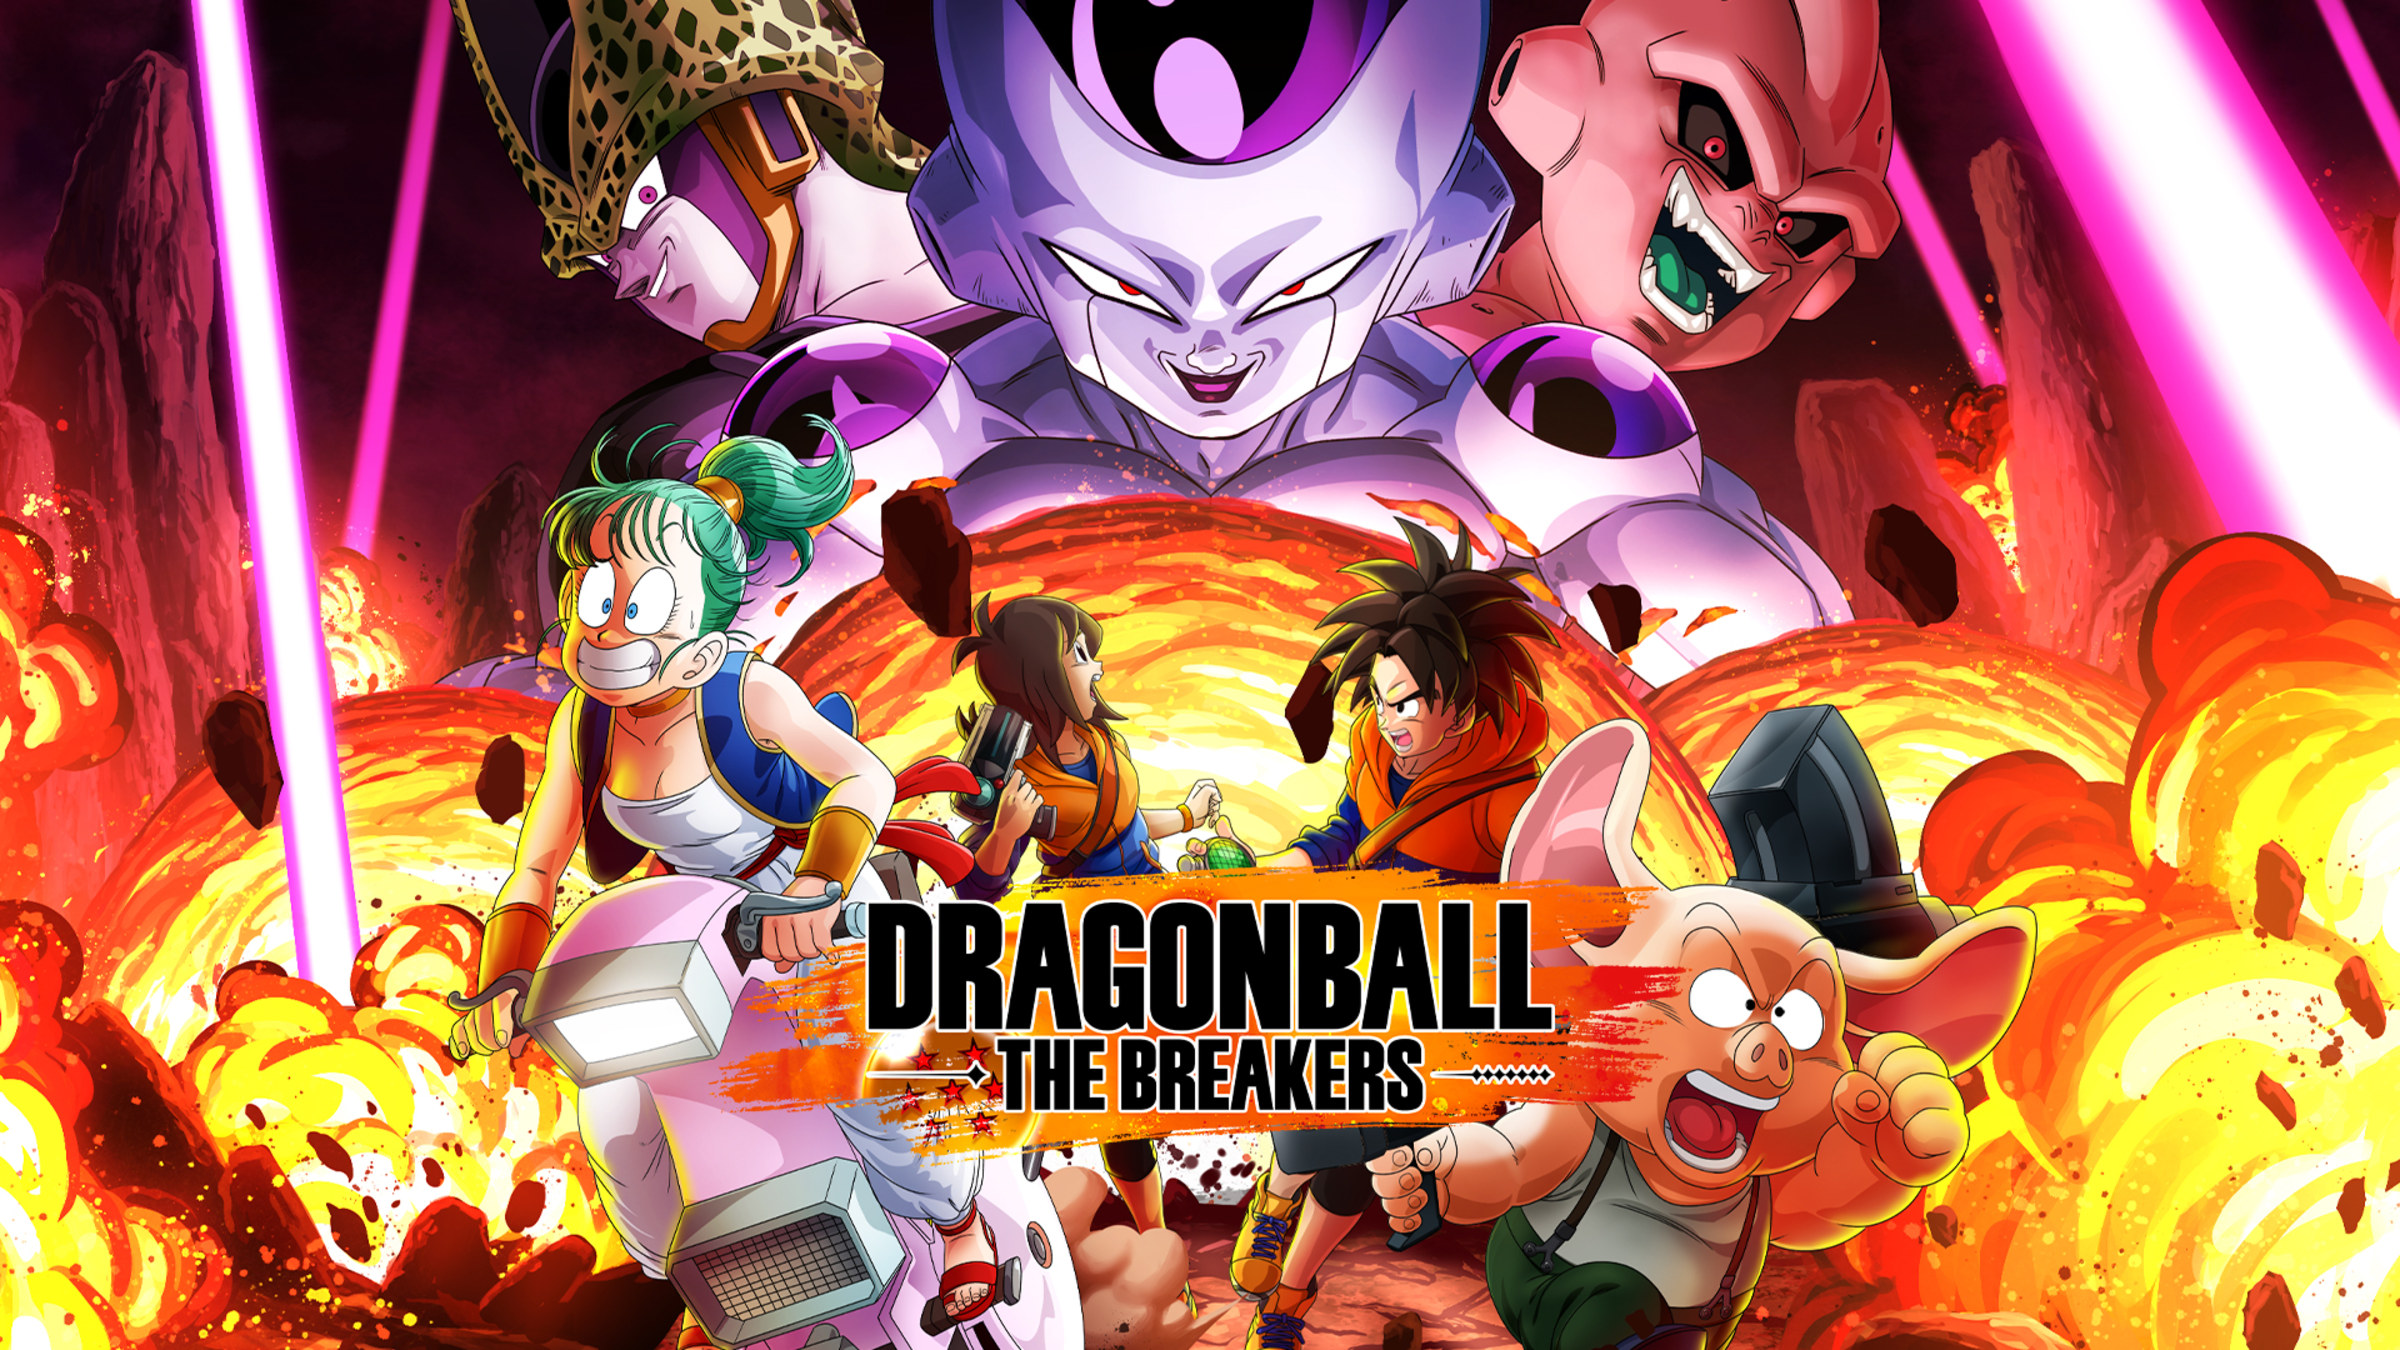 DRAGON BALL THE BREAKERS for Nintendo Switch Nintendo Official Site